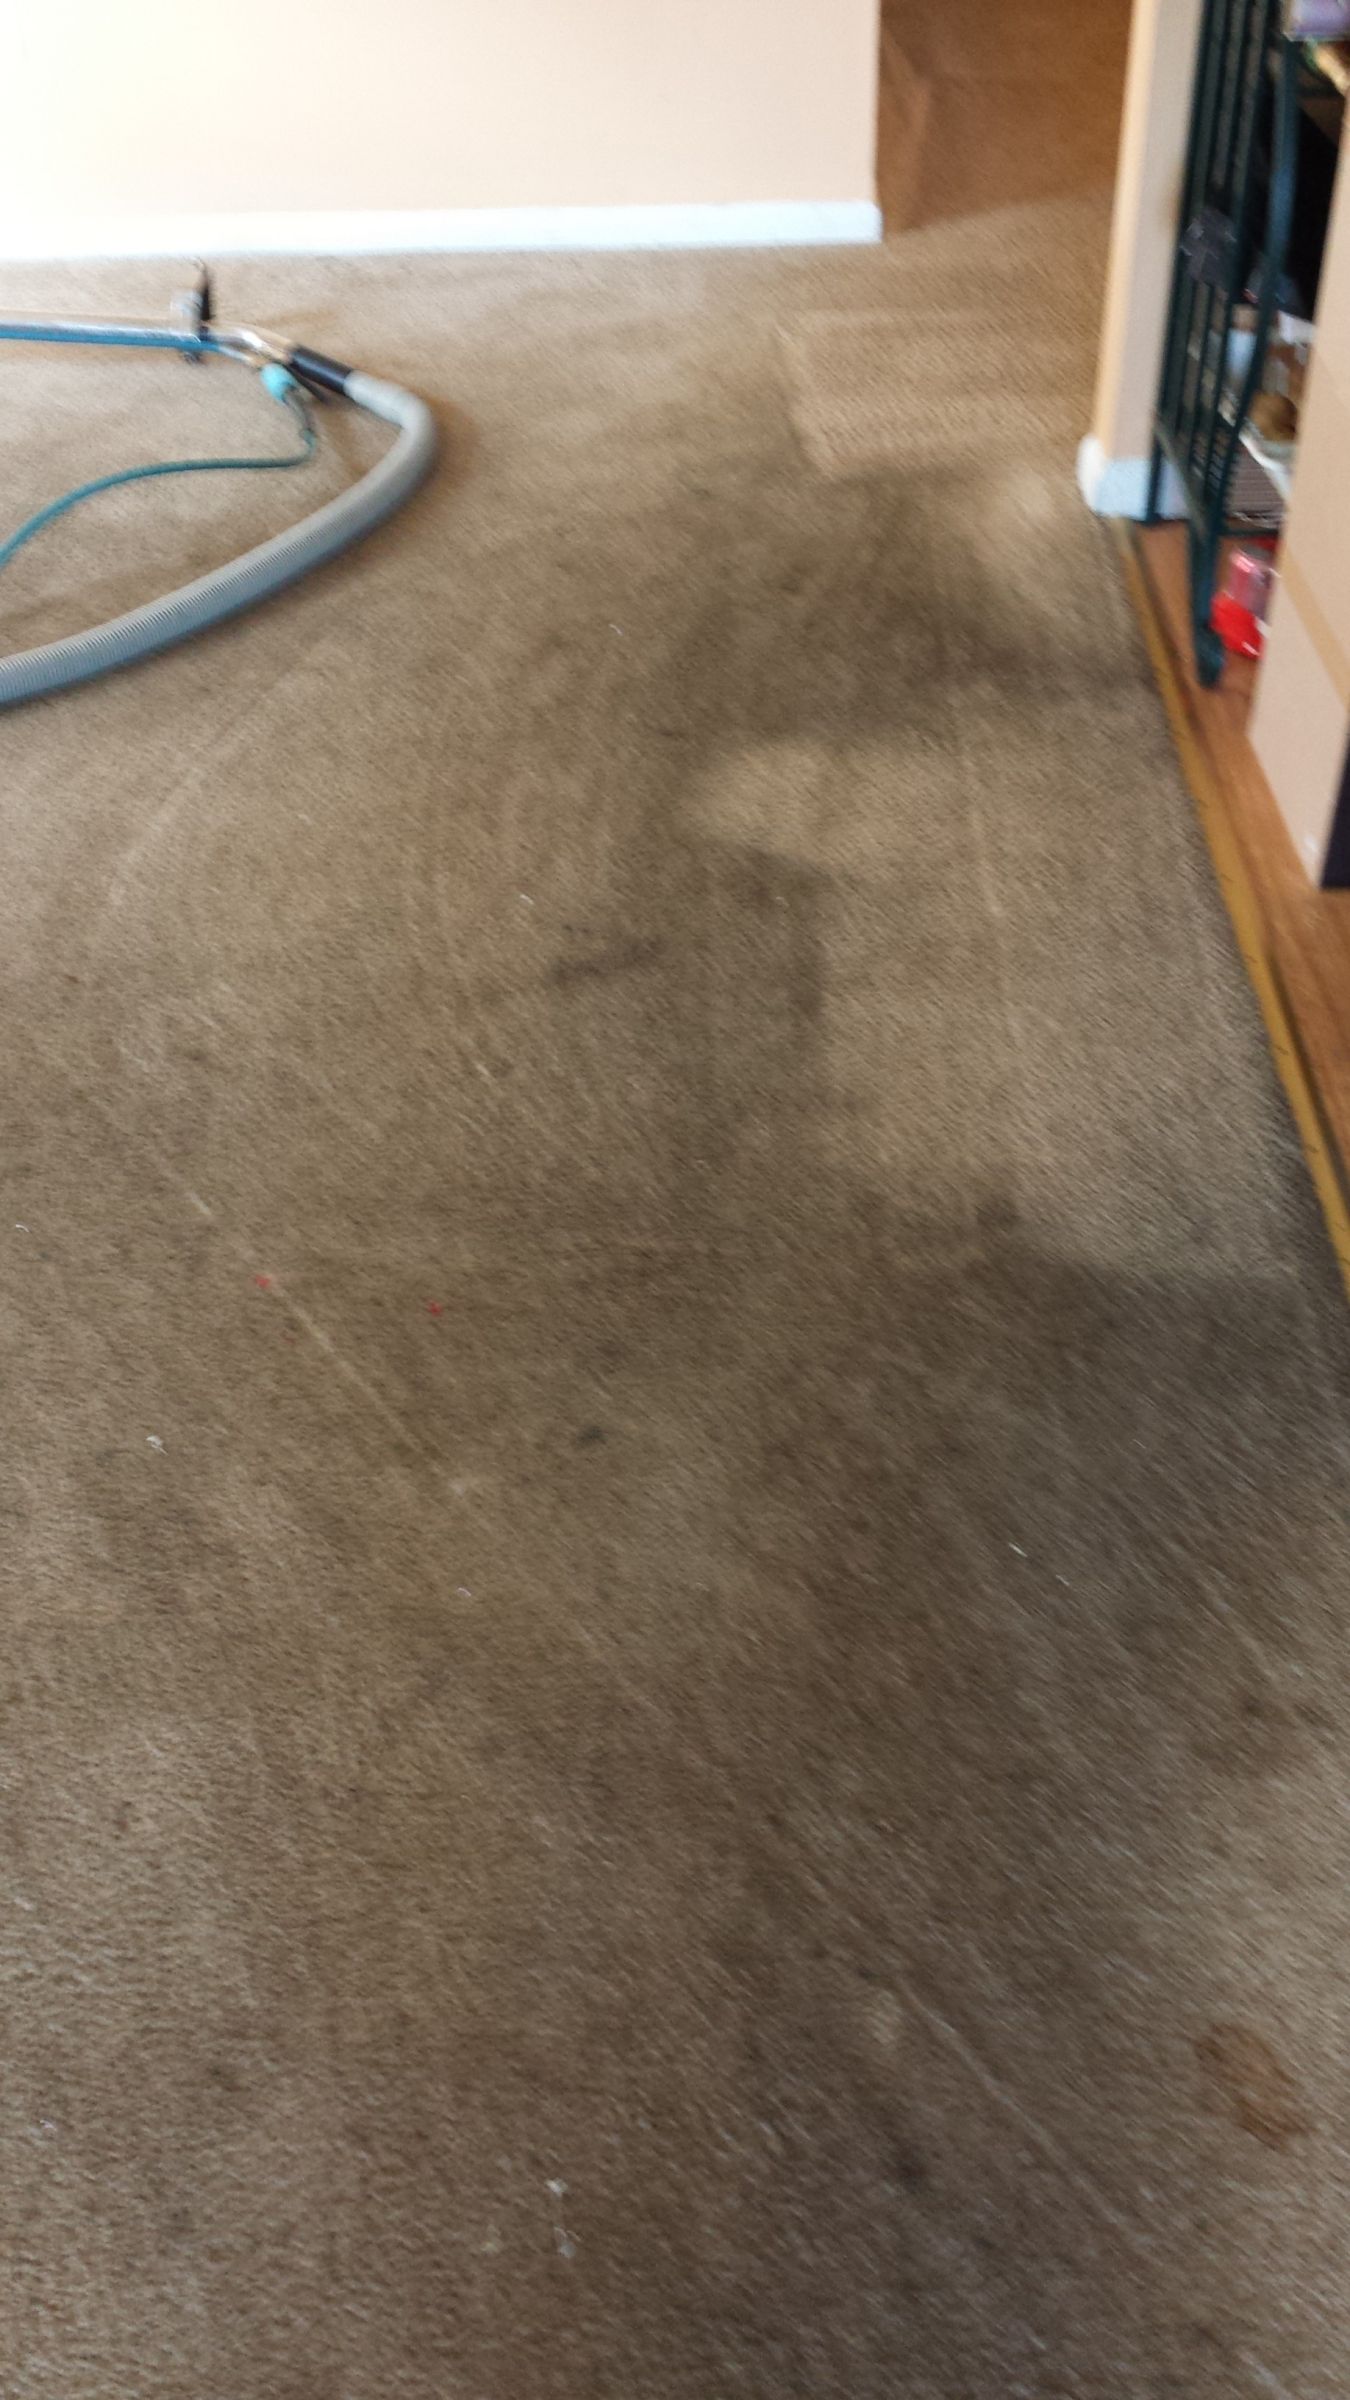 Transform Your Carpet with Majestic - Book Your Cherry Hill Carpet Cleaning Today